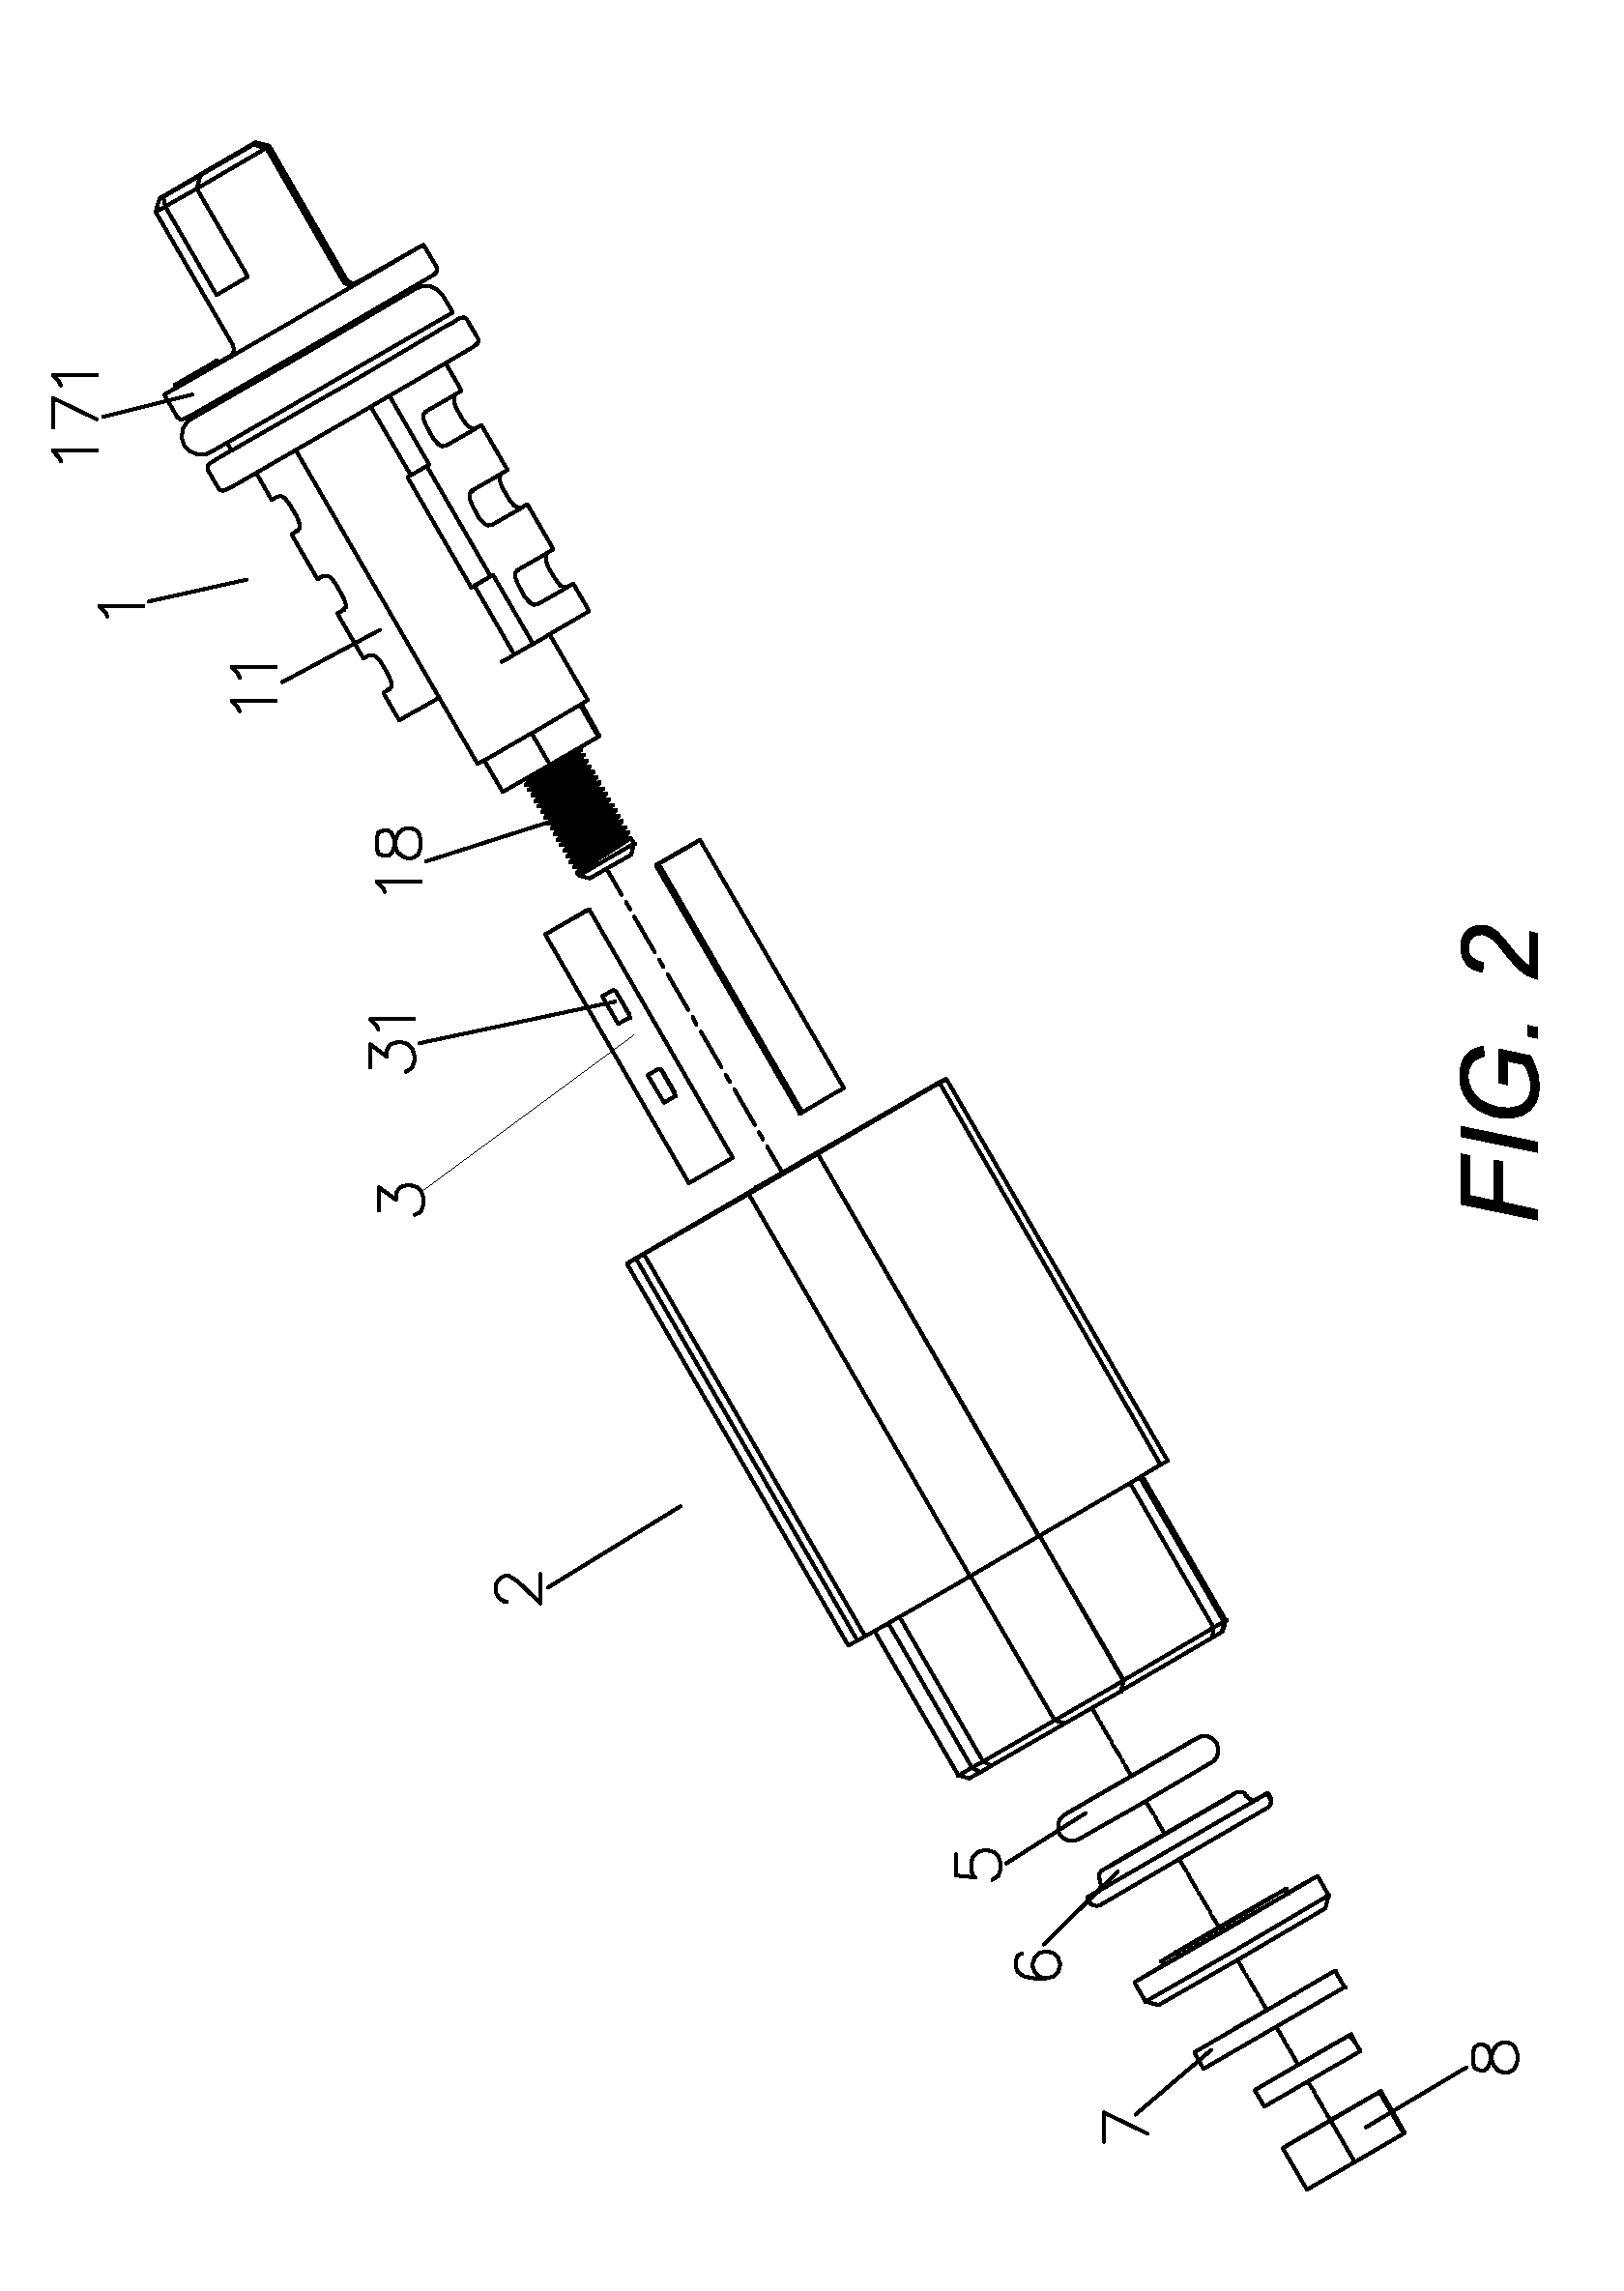 Damping device